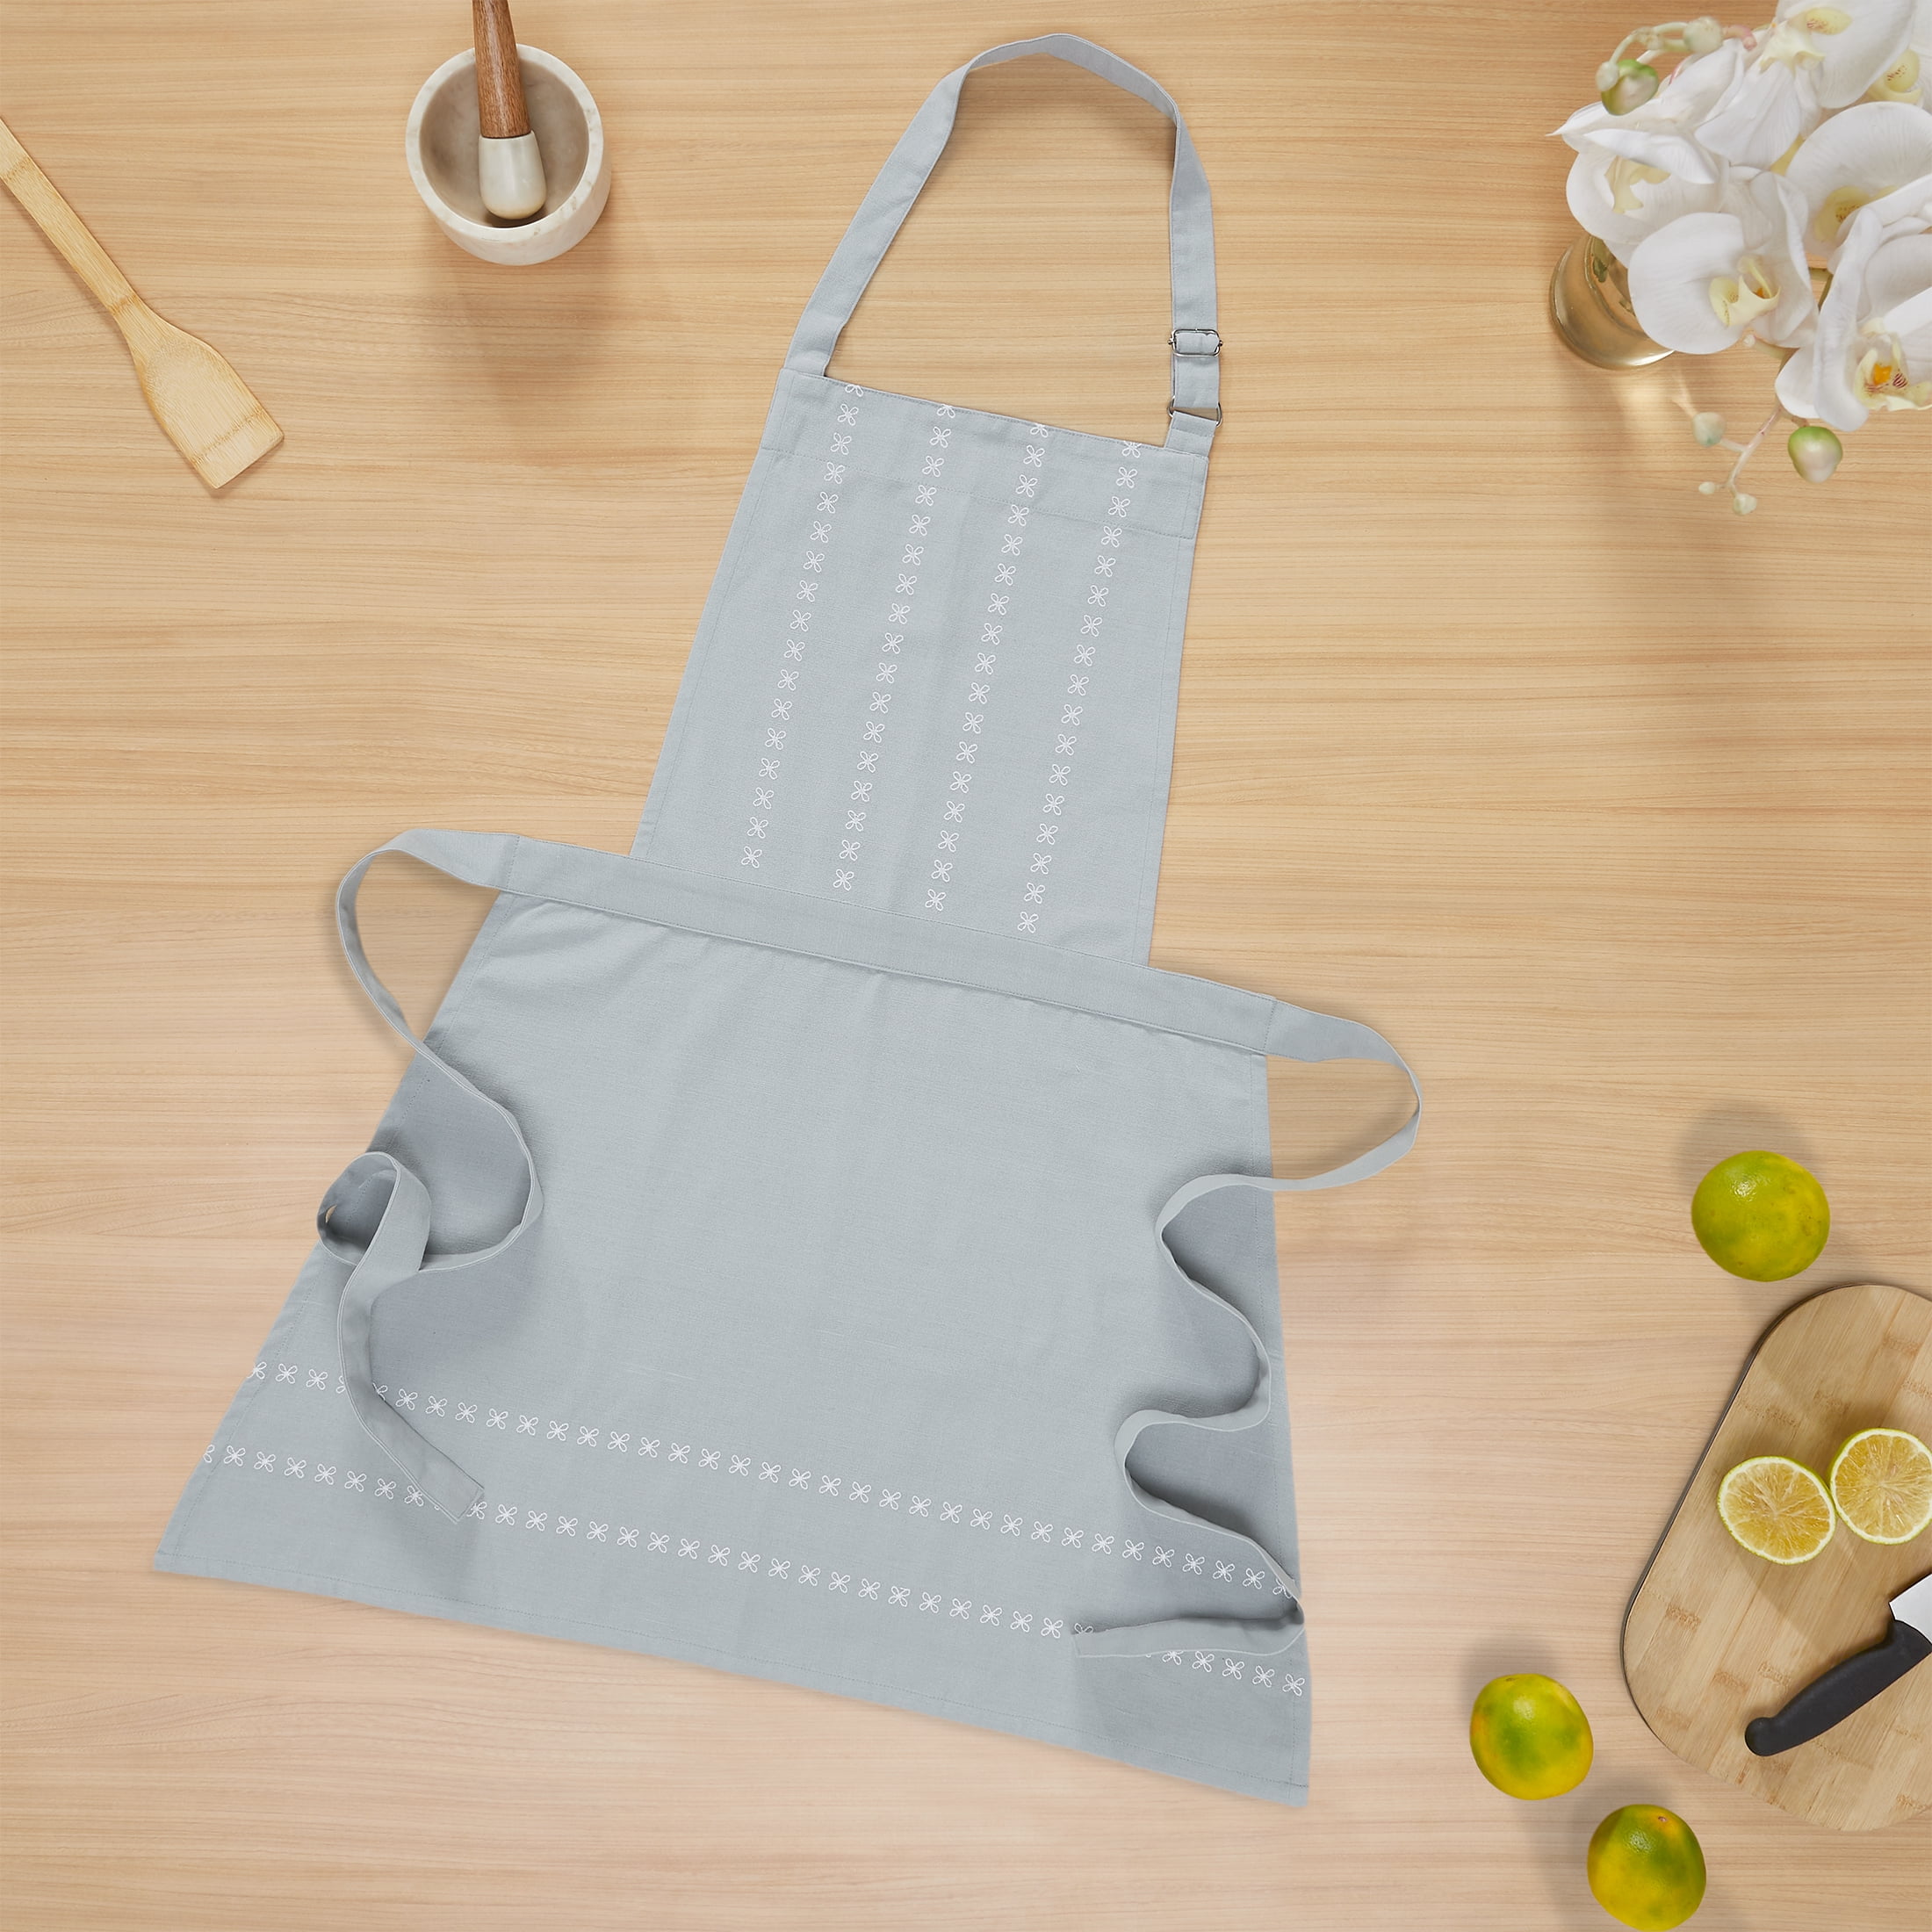 My Texas House Polyester/Cotton 30" x 54" Embroidered Loop Apron, Gray